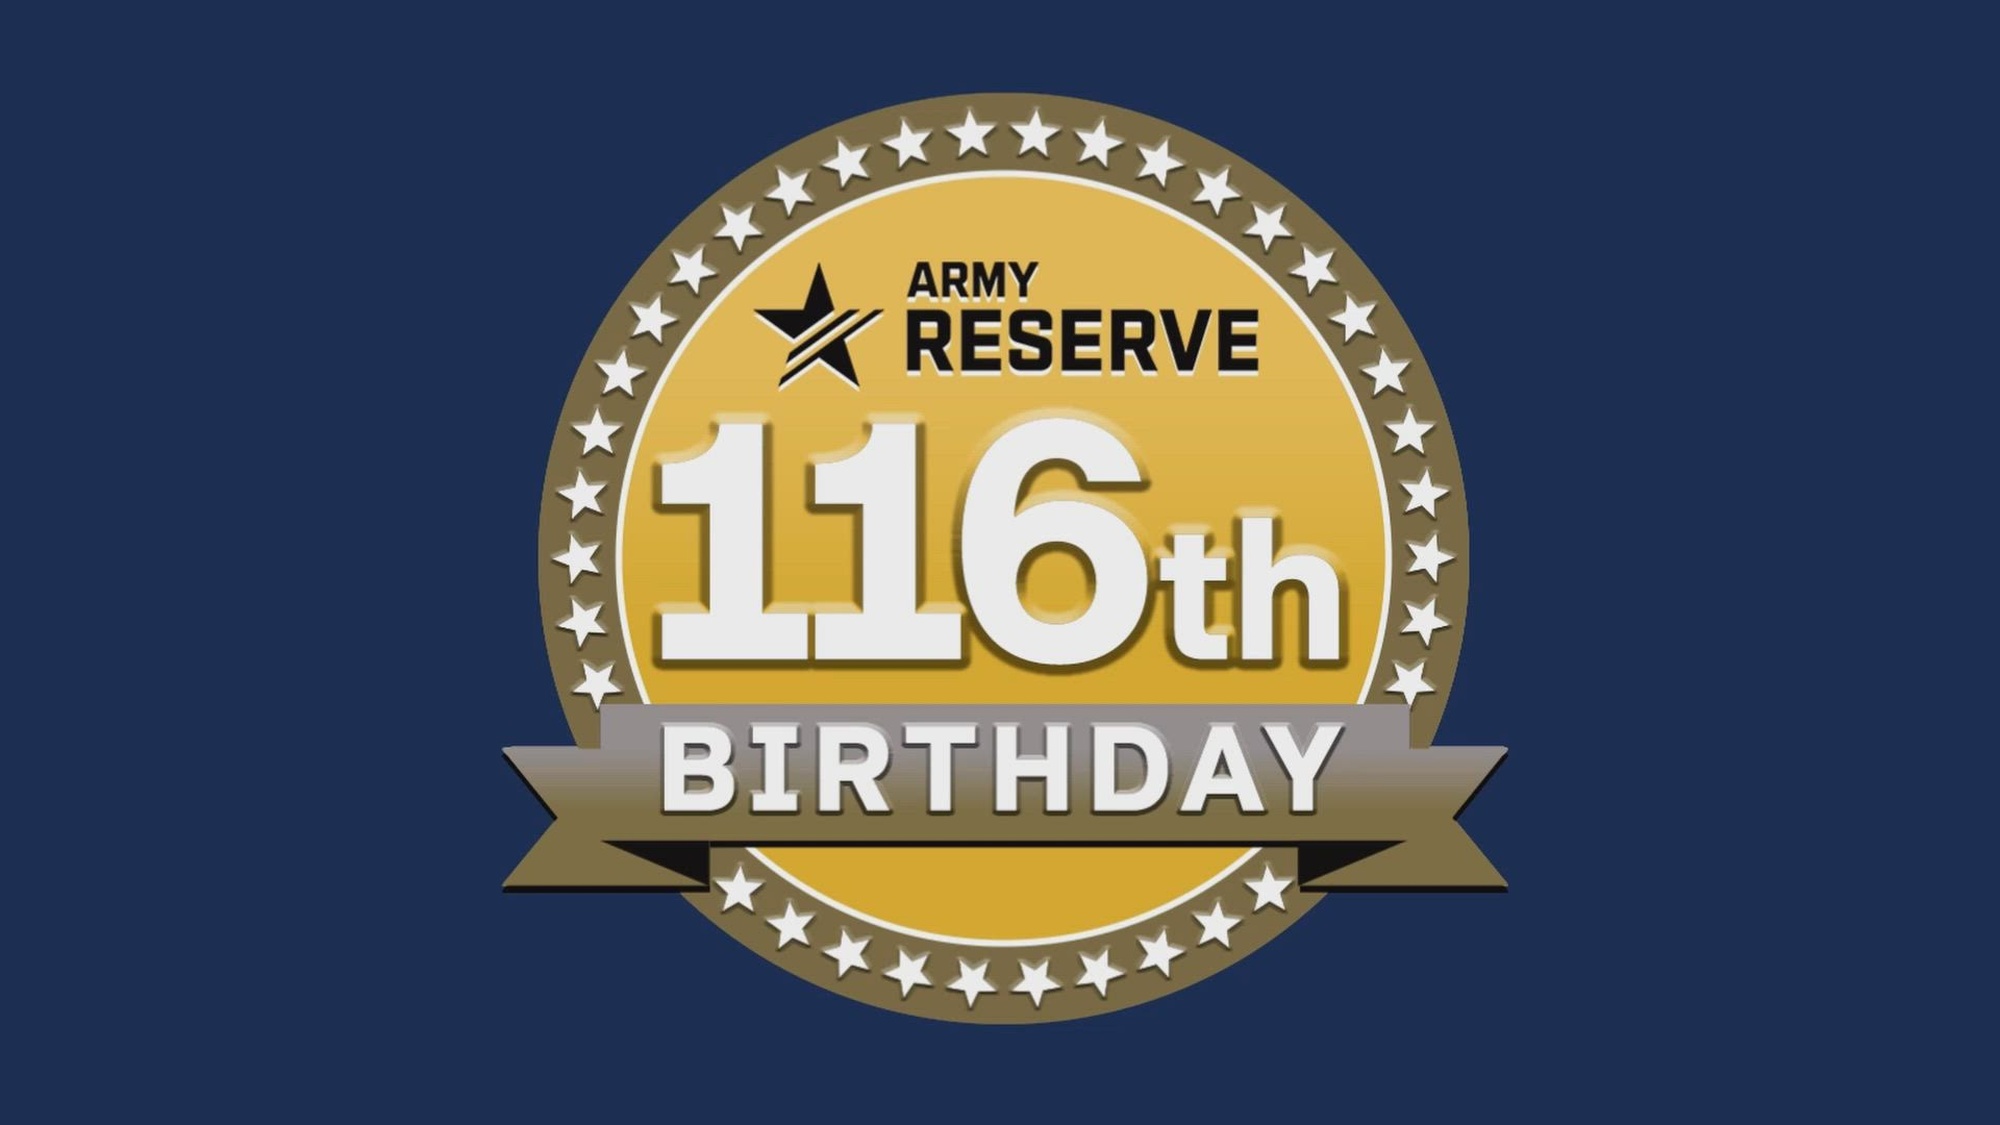 Army Reserve Medical Command wishes the Army Reserve a happy 116th birthday by displaying the capabilities of our medical Army Reserve Soldiers. 

Music: Hope and Future by Edgar Hopp provided by Epidemic Sound